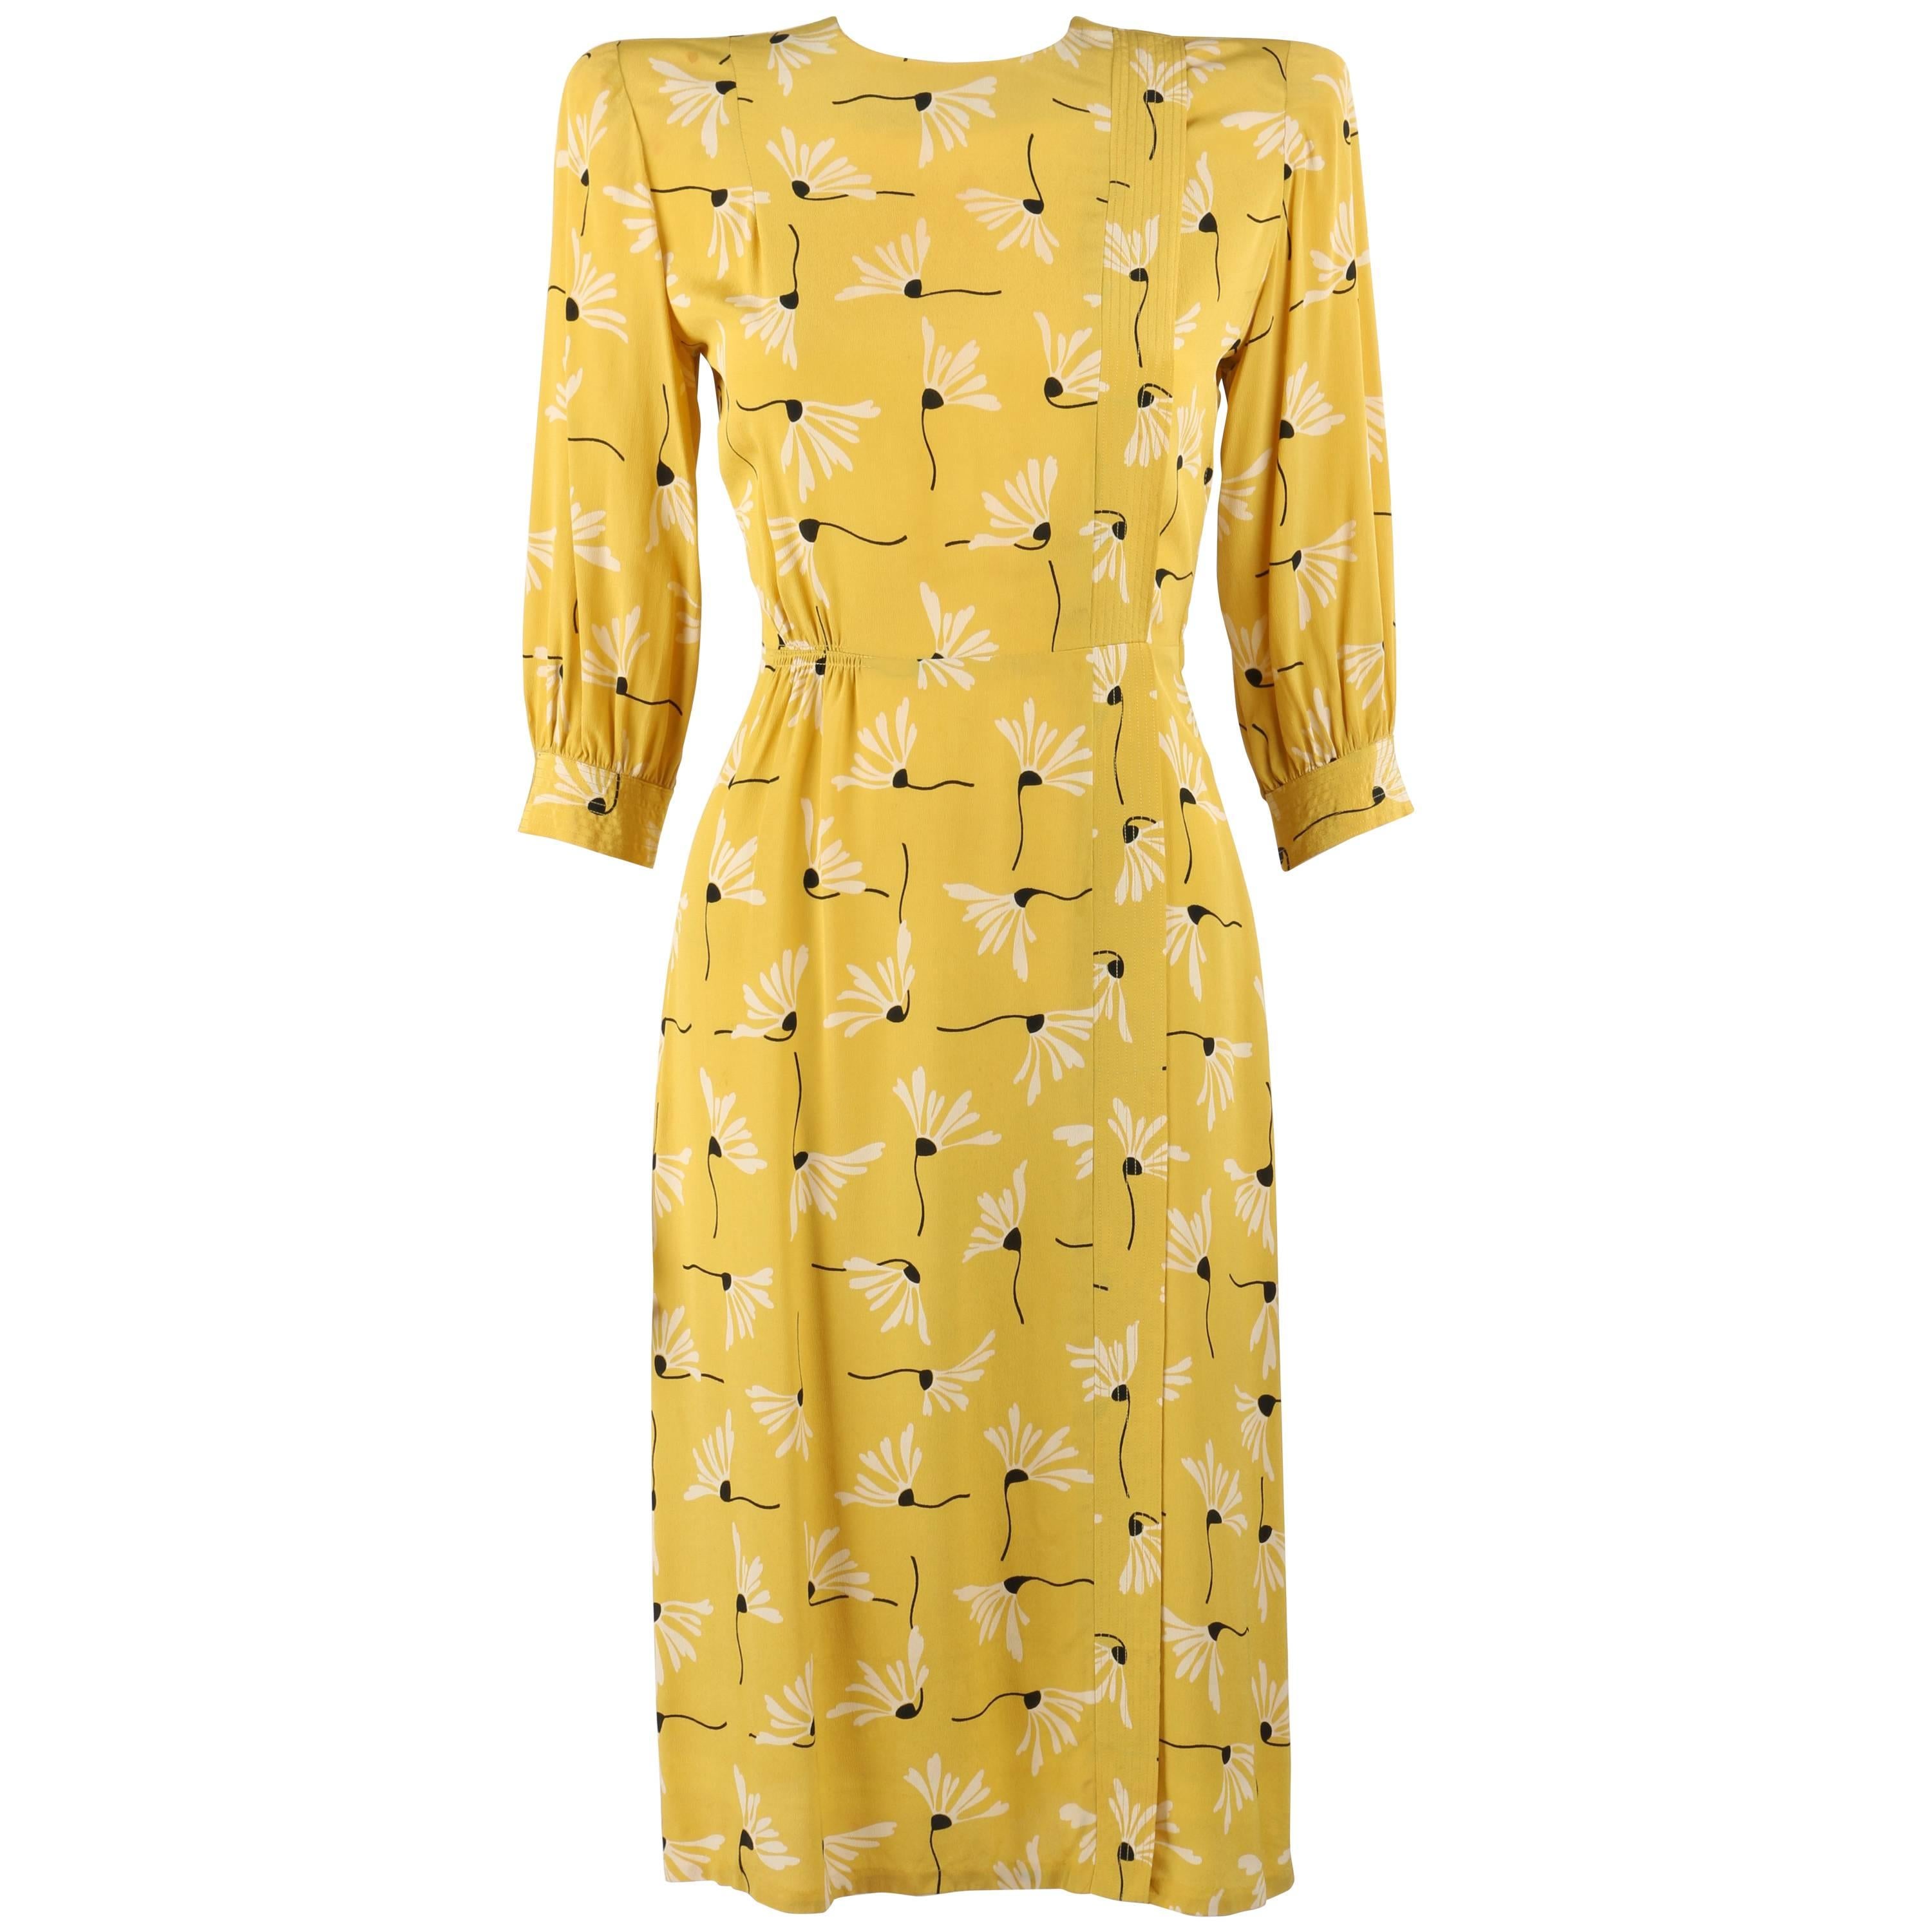 SERGEE OF CALIFORNIA c.1940's Yellow Daisy Floral Print Rayon Crepe Day Dress For Sale